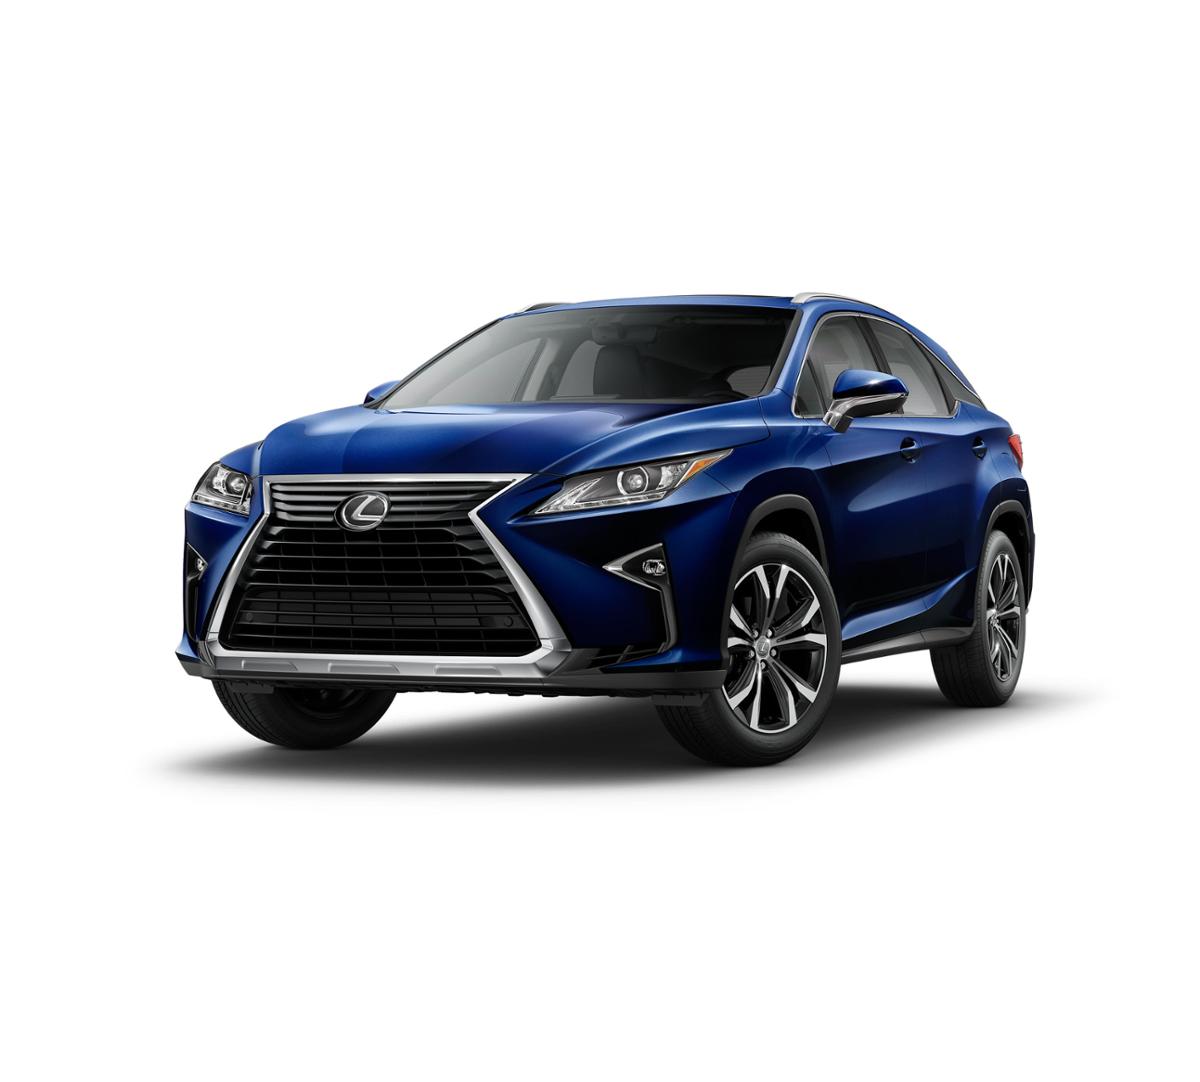 East Haven Lexus RX 350 2018 Nightfall Mica: New Suv for Sale - L80492